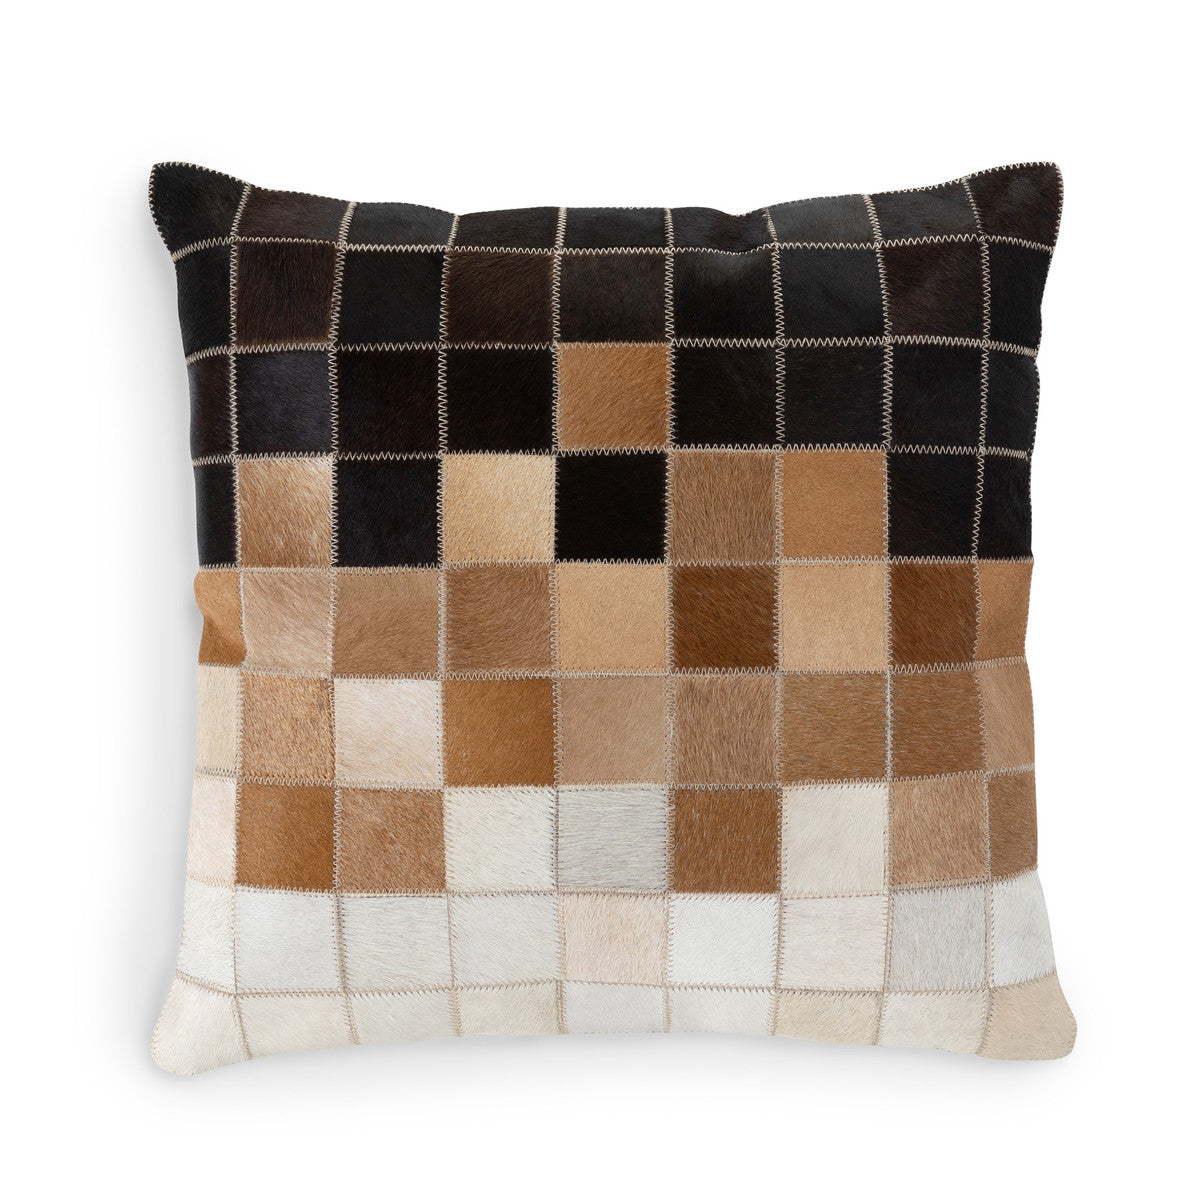 Hair-On Hide Leather Patchwork Pillow